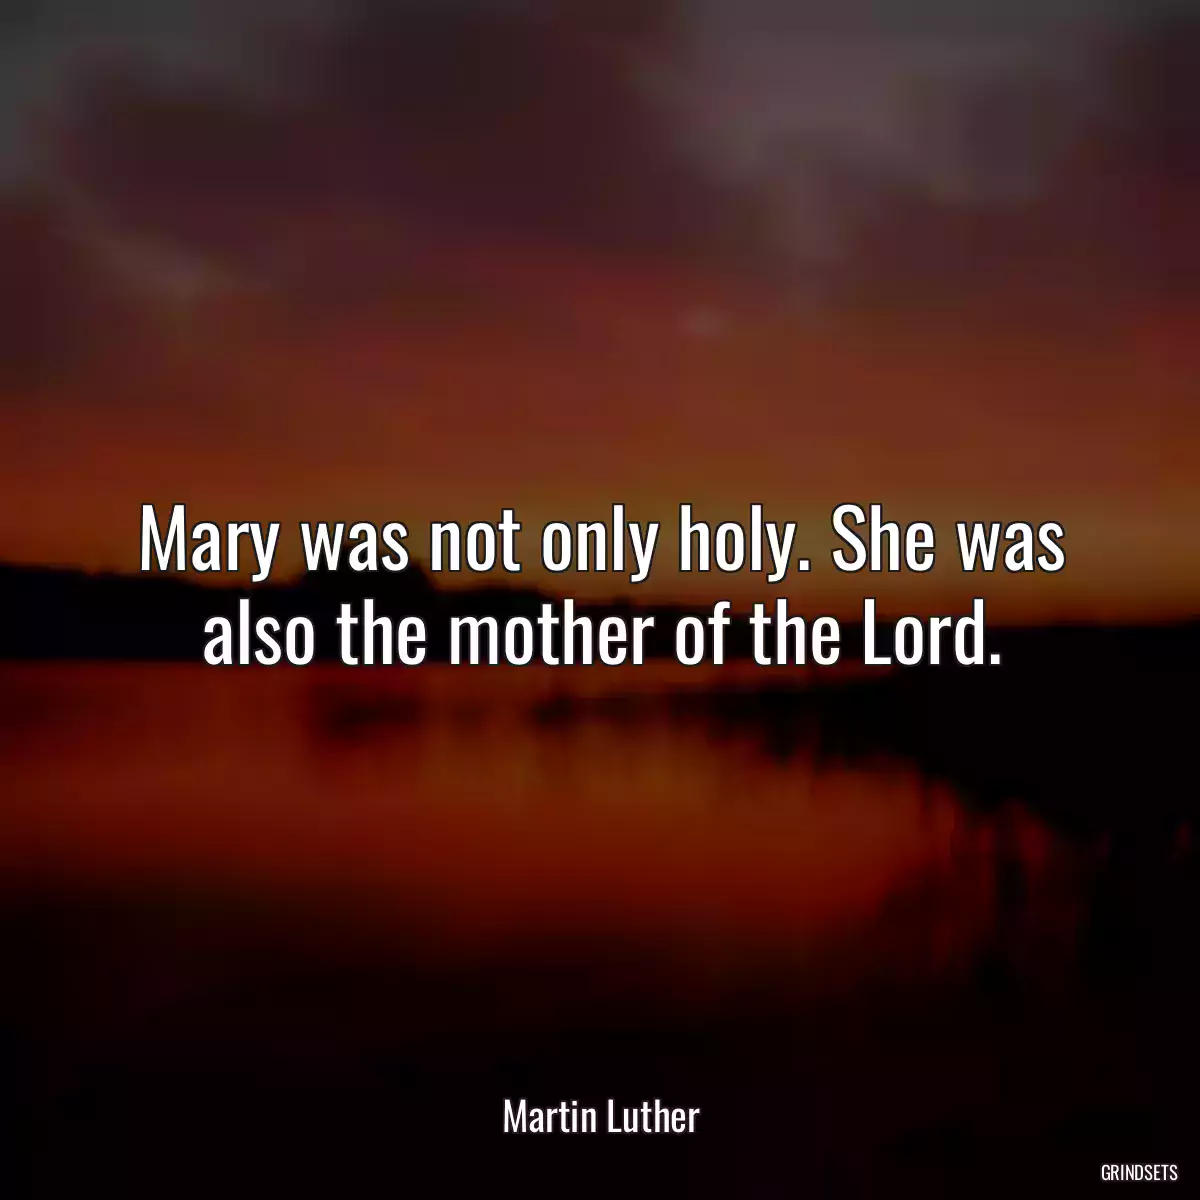 Mary was not only holy. She was also the mother of the Lord.